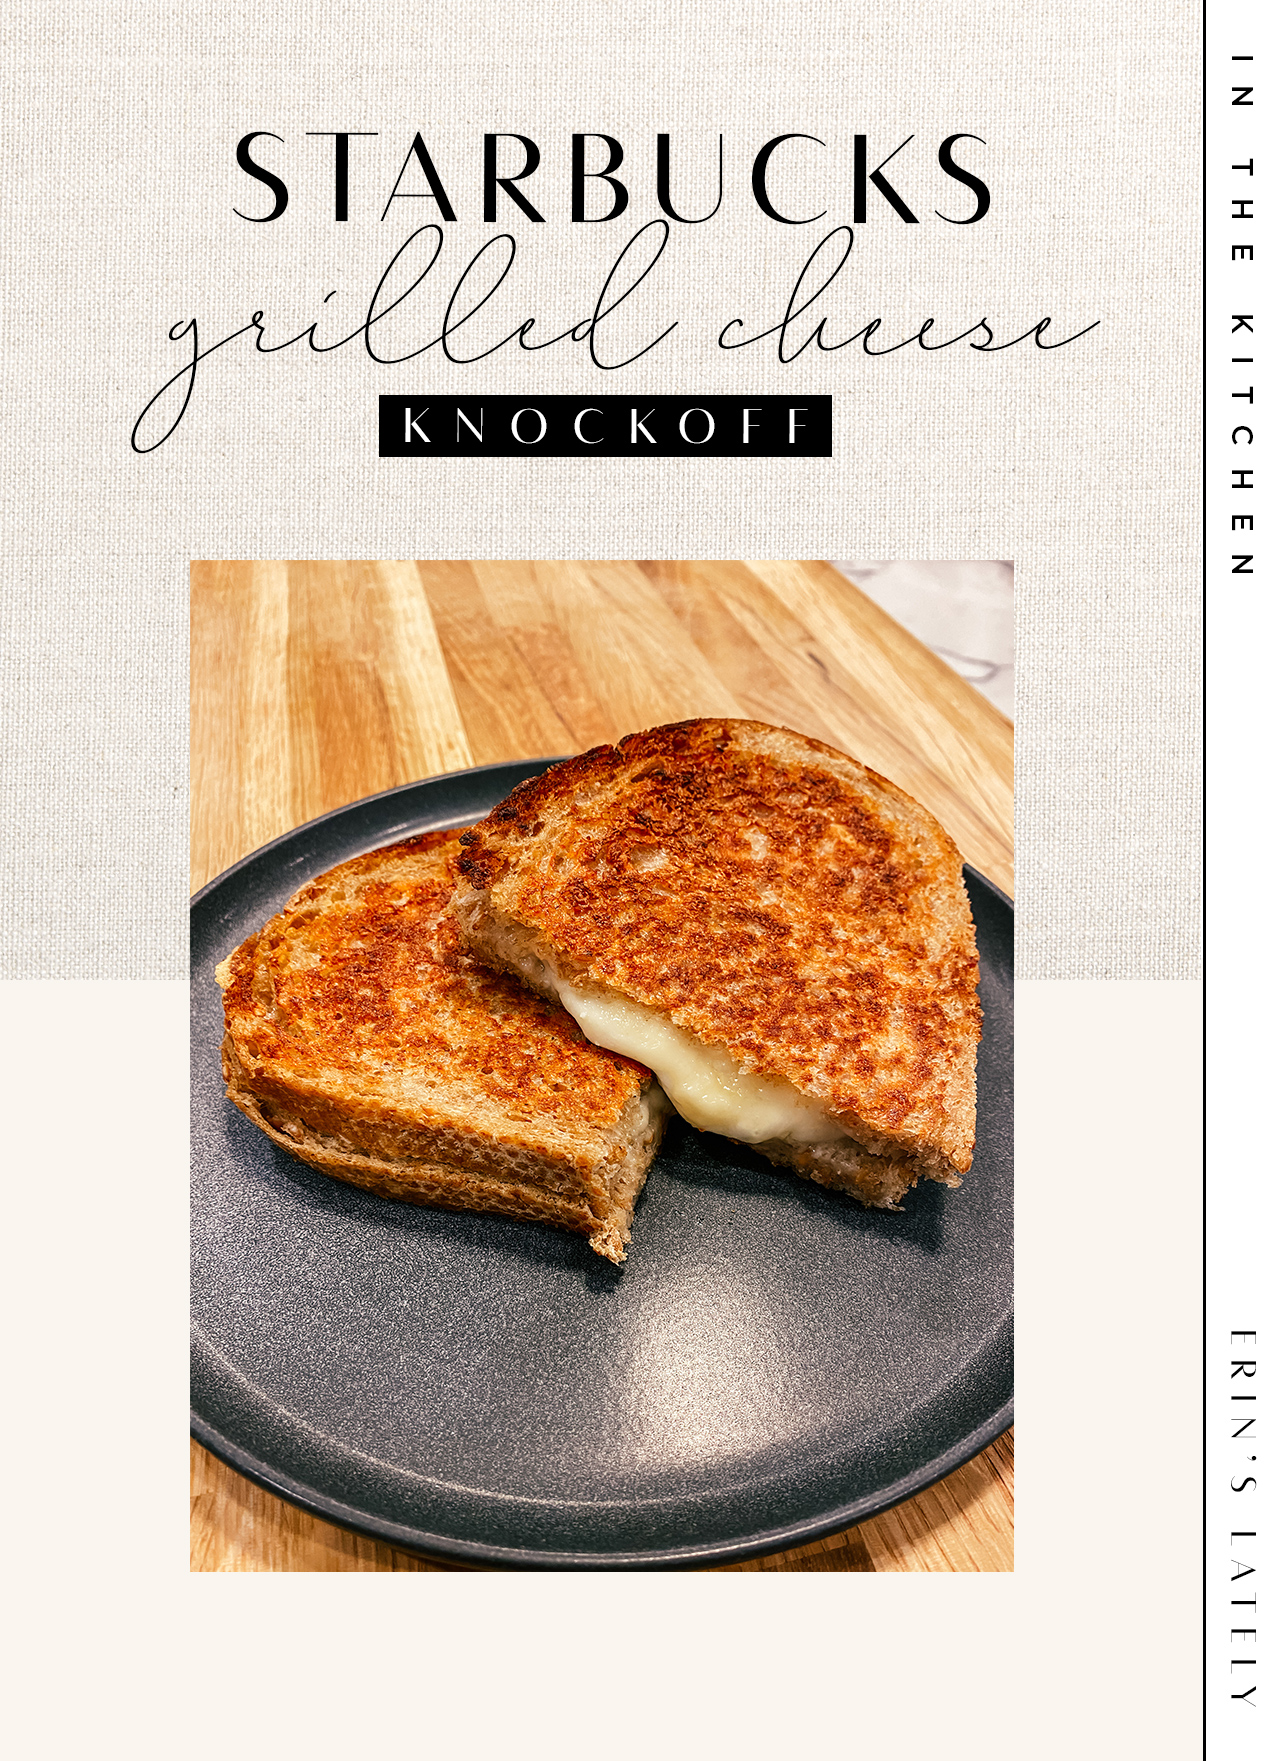 starbucks grilled cheese knockoff